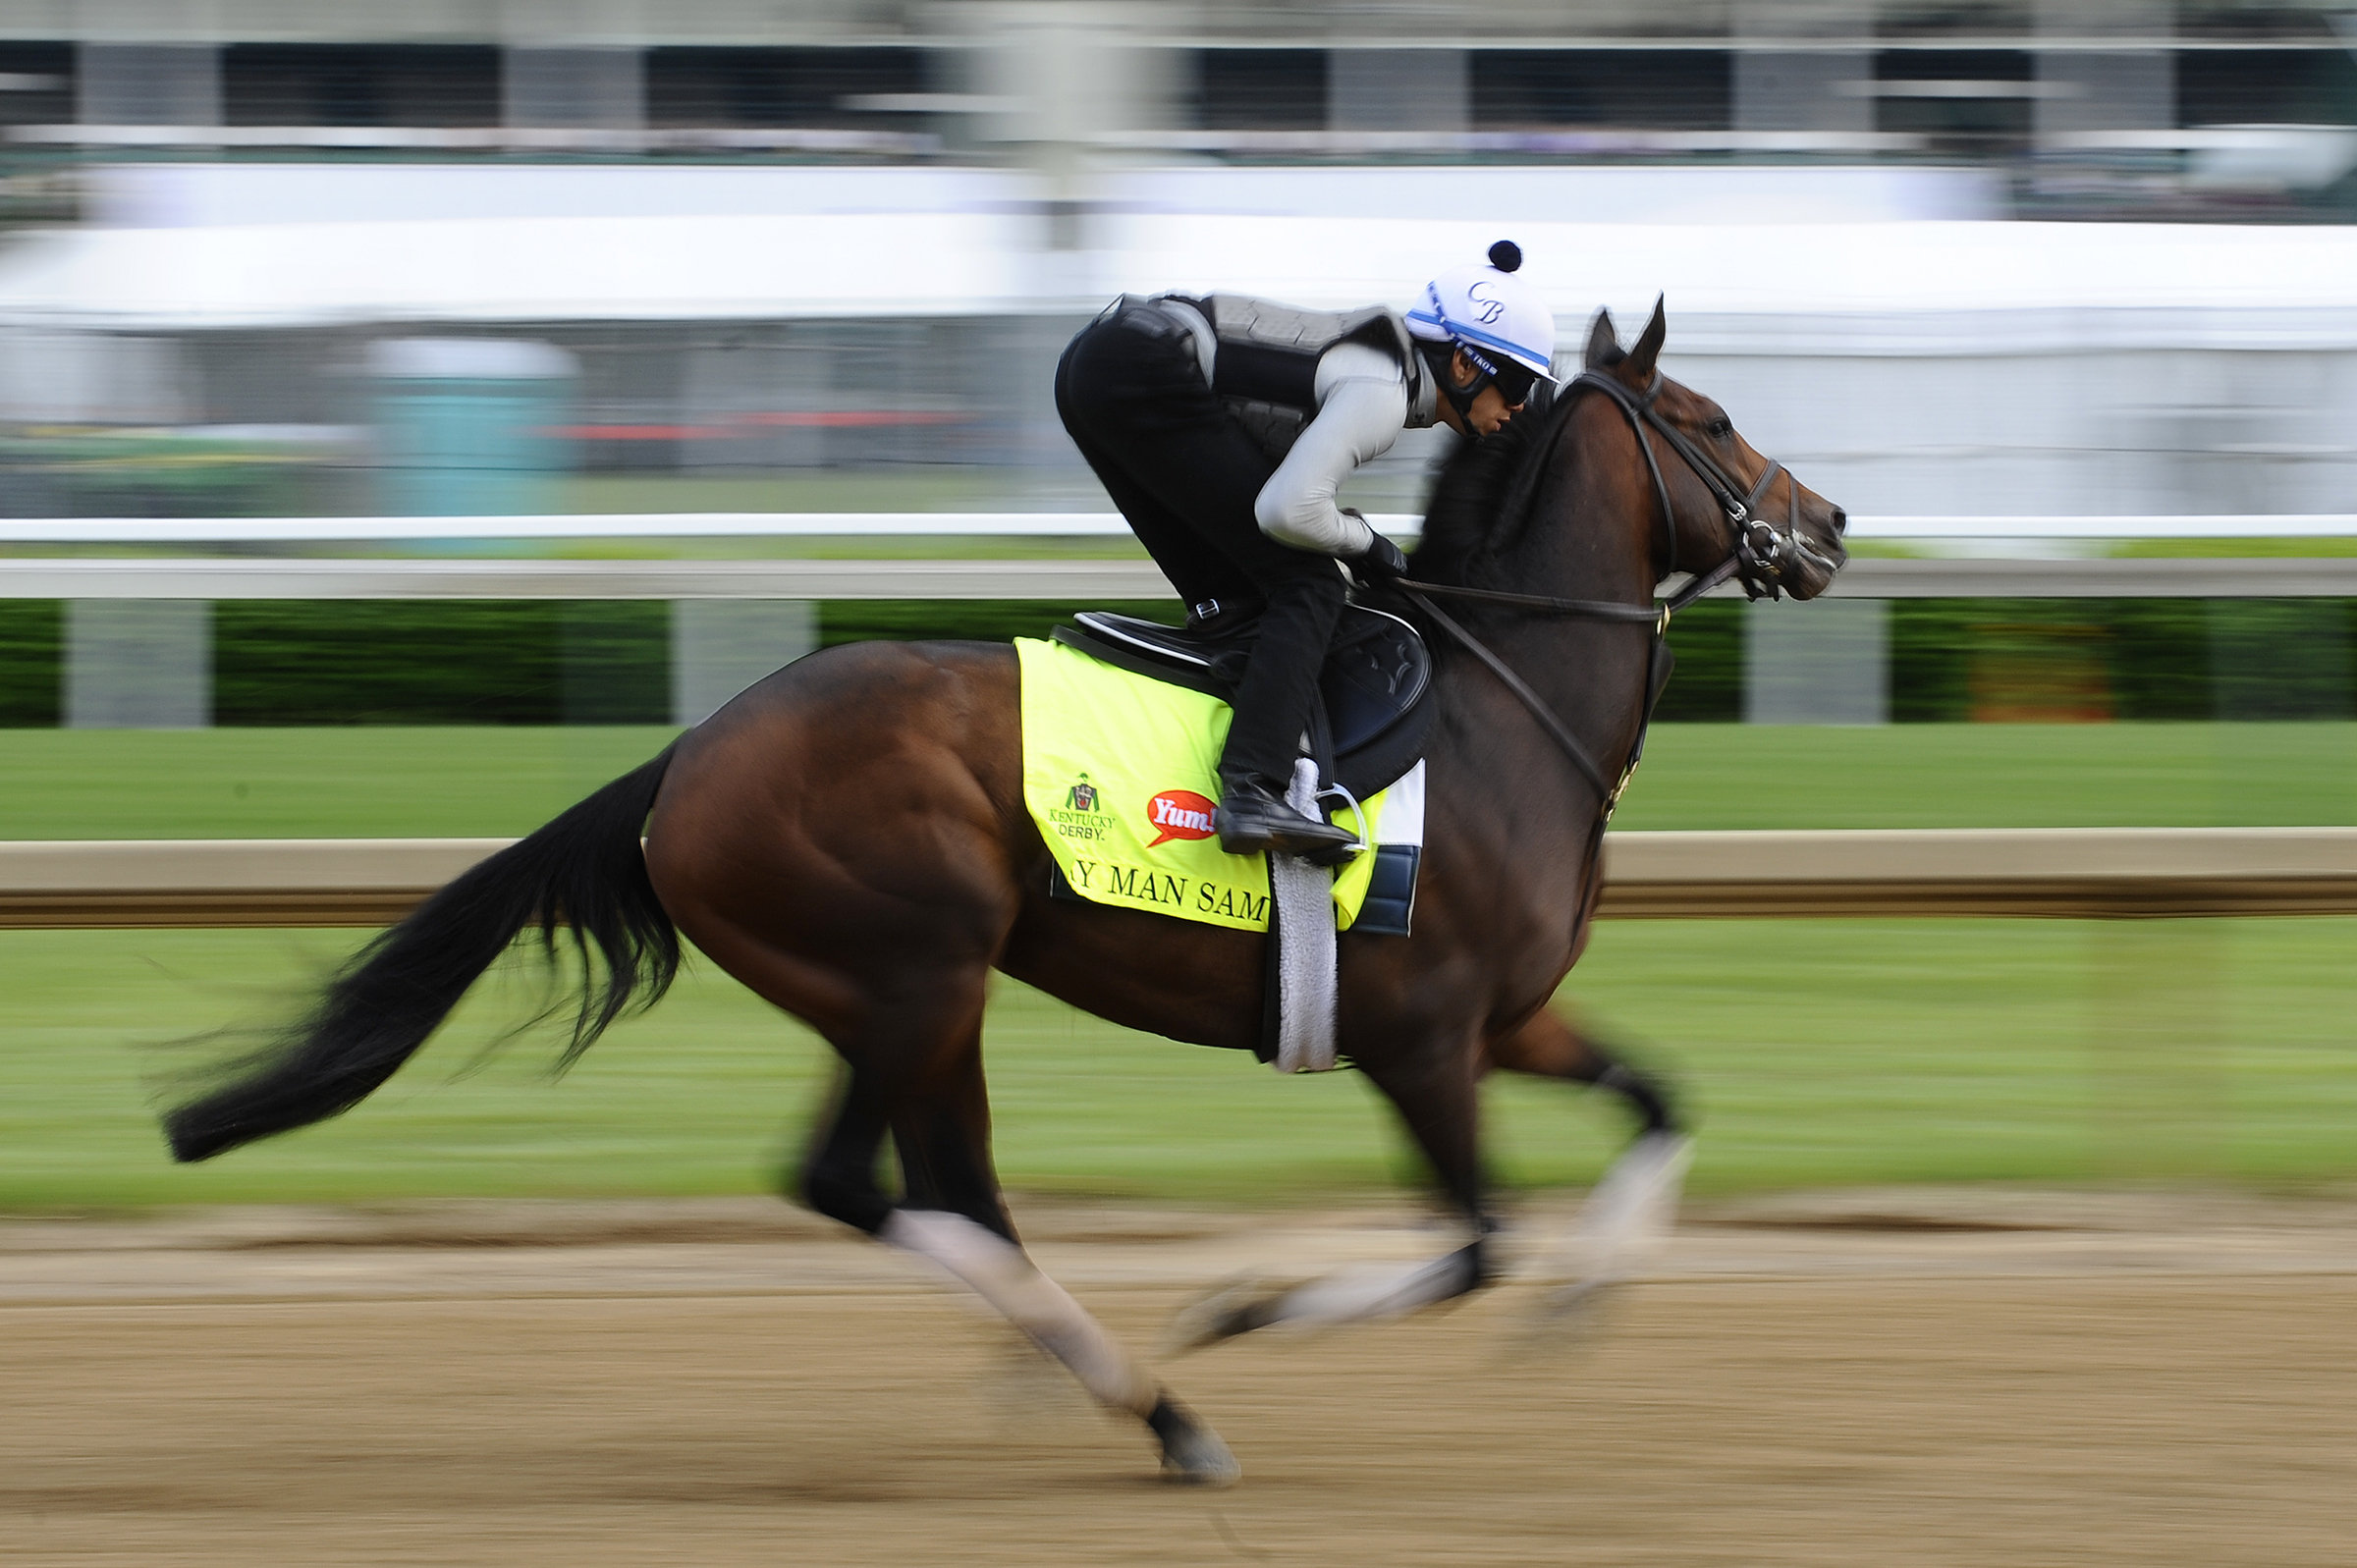  Kentucky Derby horse My Man Sam goes through morning workouts on Wednesday, May 4, 2016, at Churchill Downs racetrack. 